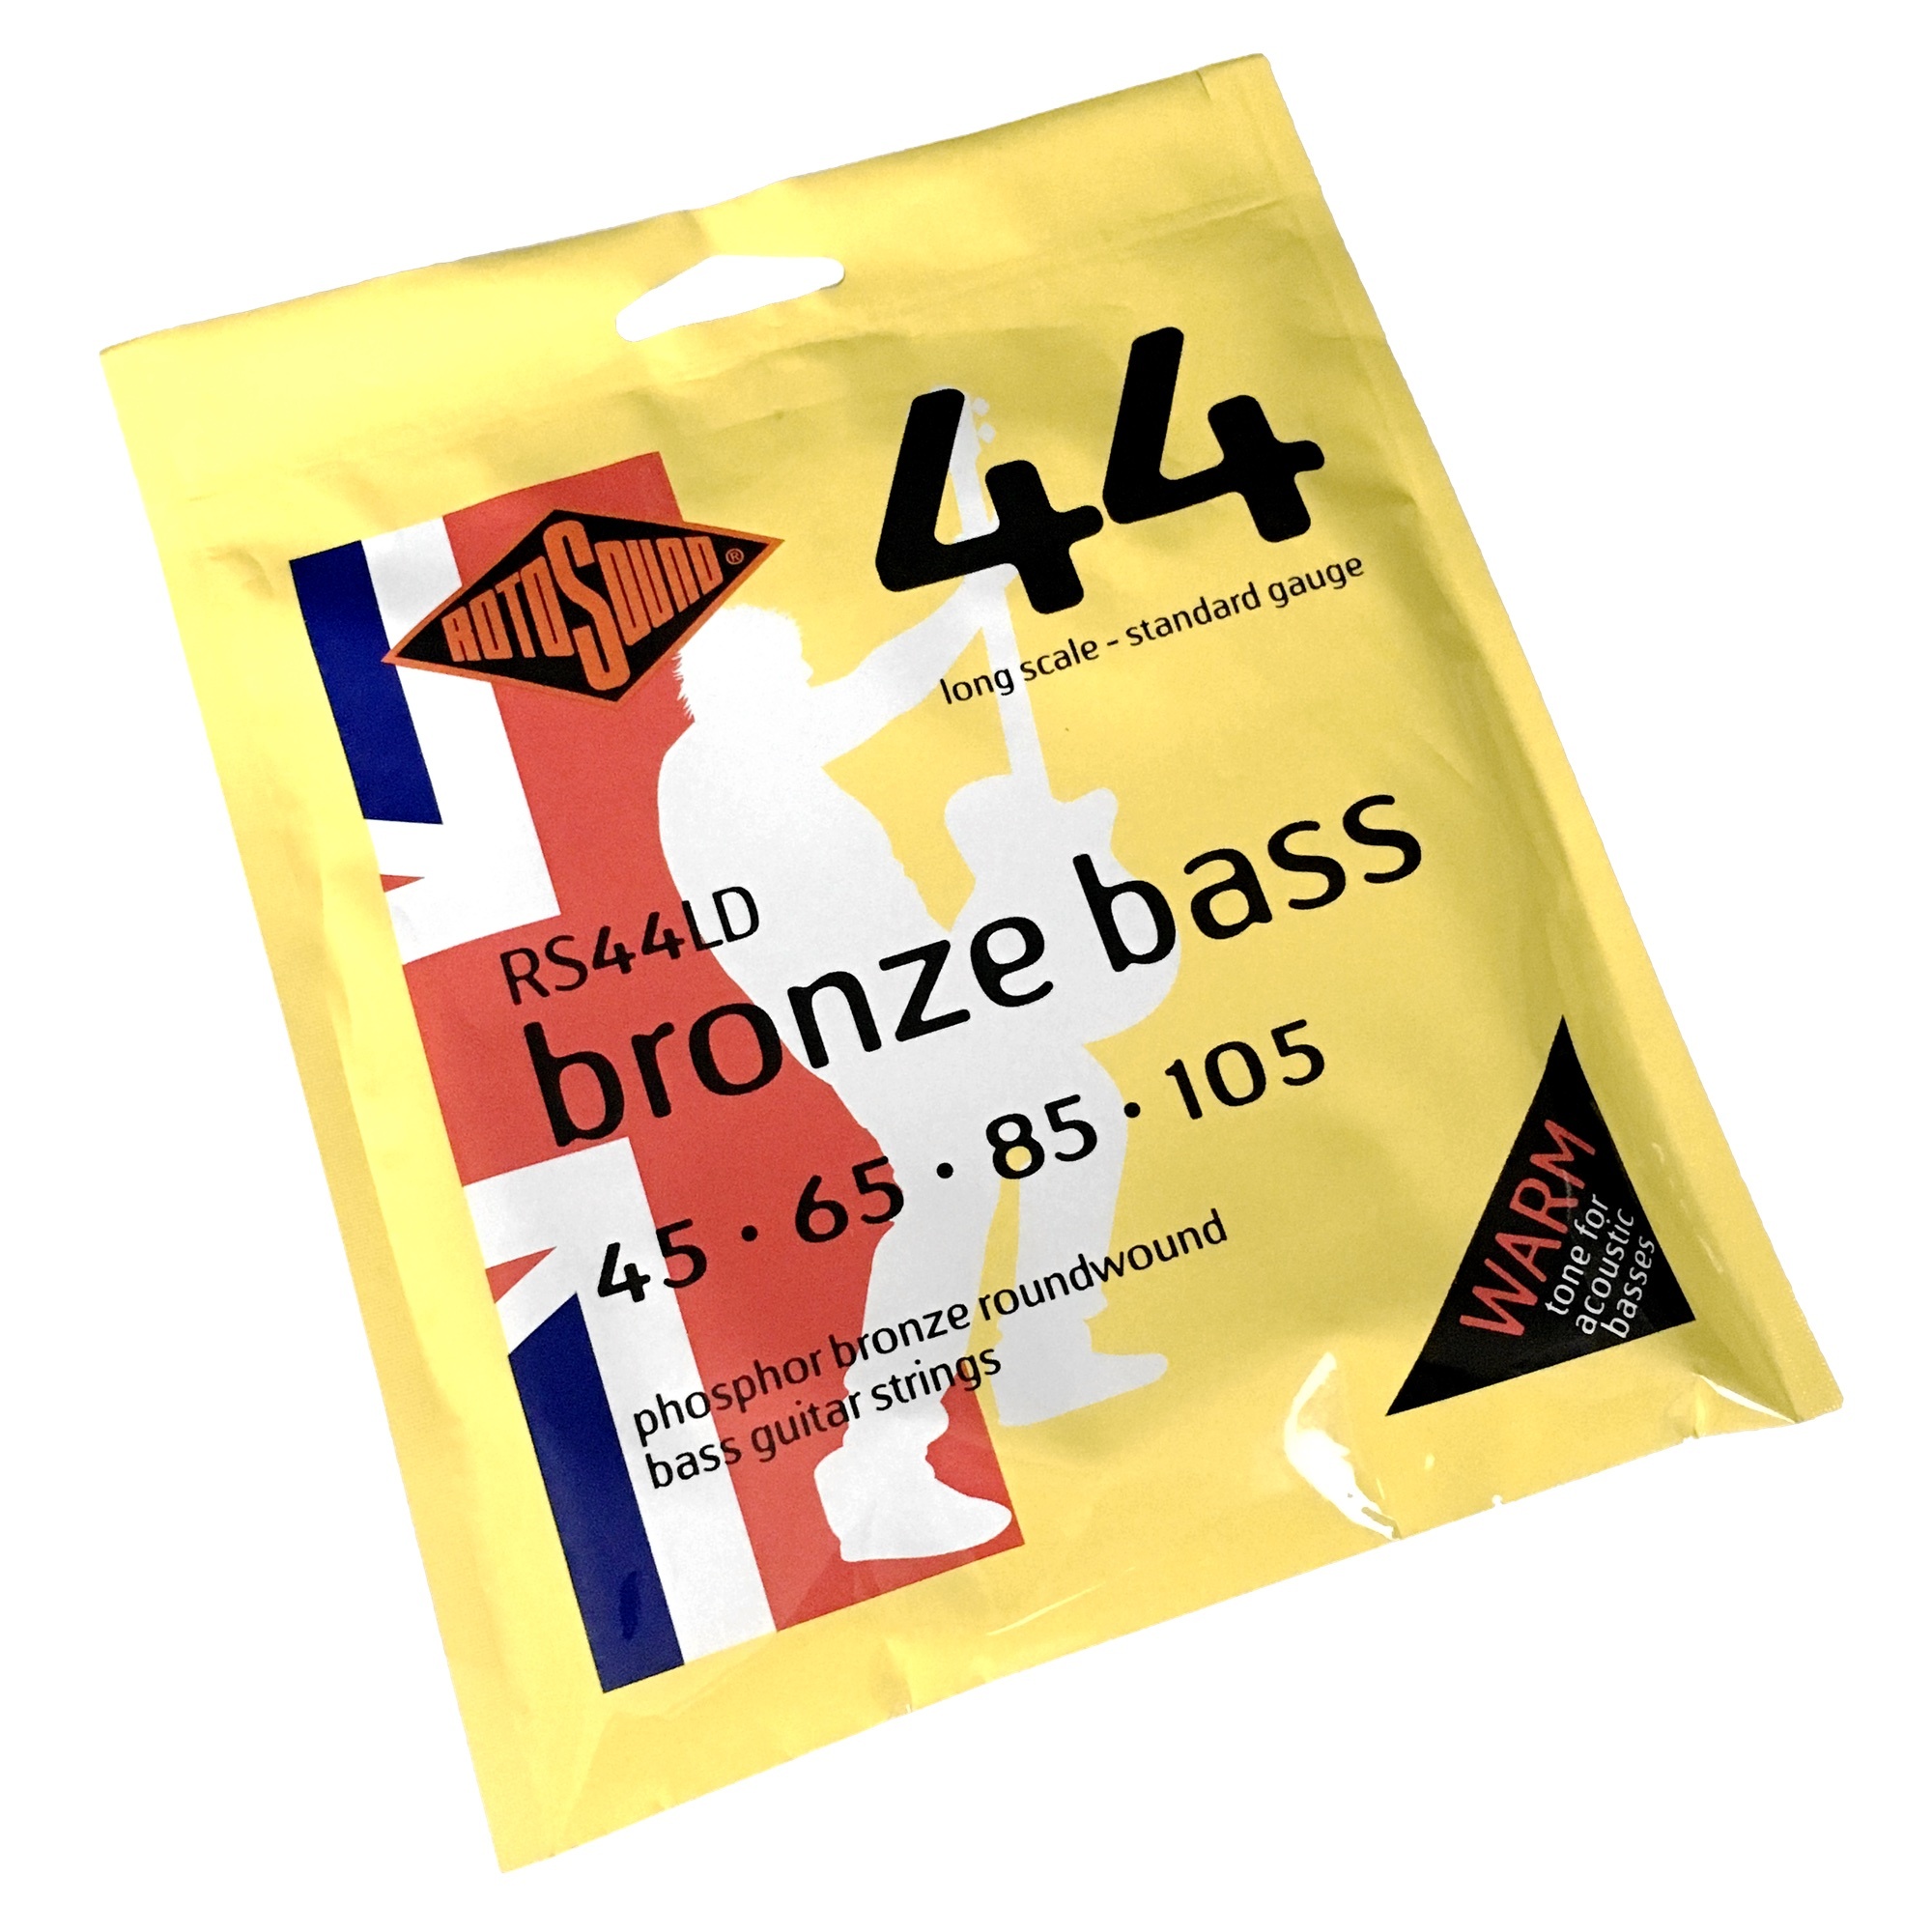 Rotosound RS44LD 44 Bronze Bass, Phosphor Bronze Roundwound Bass Guitar Strings (45-105), Acoustic